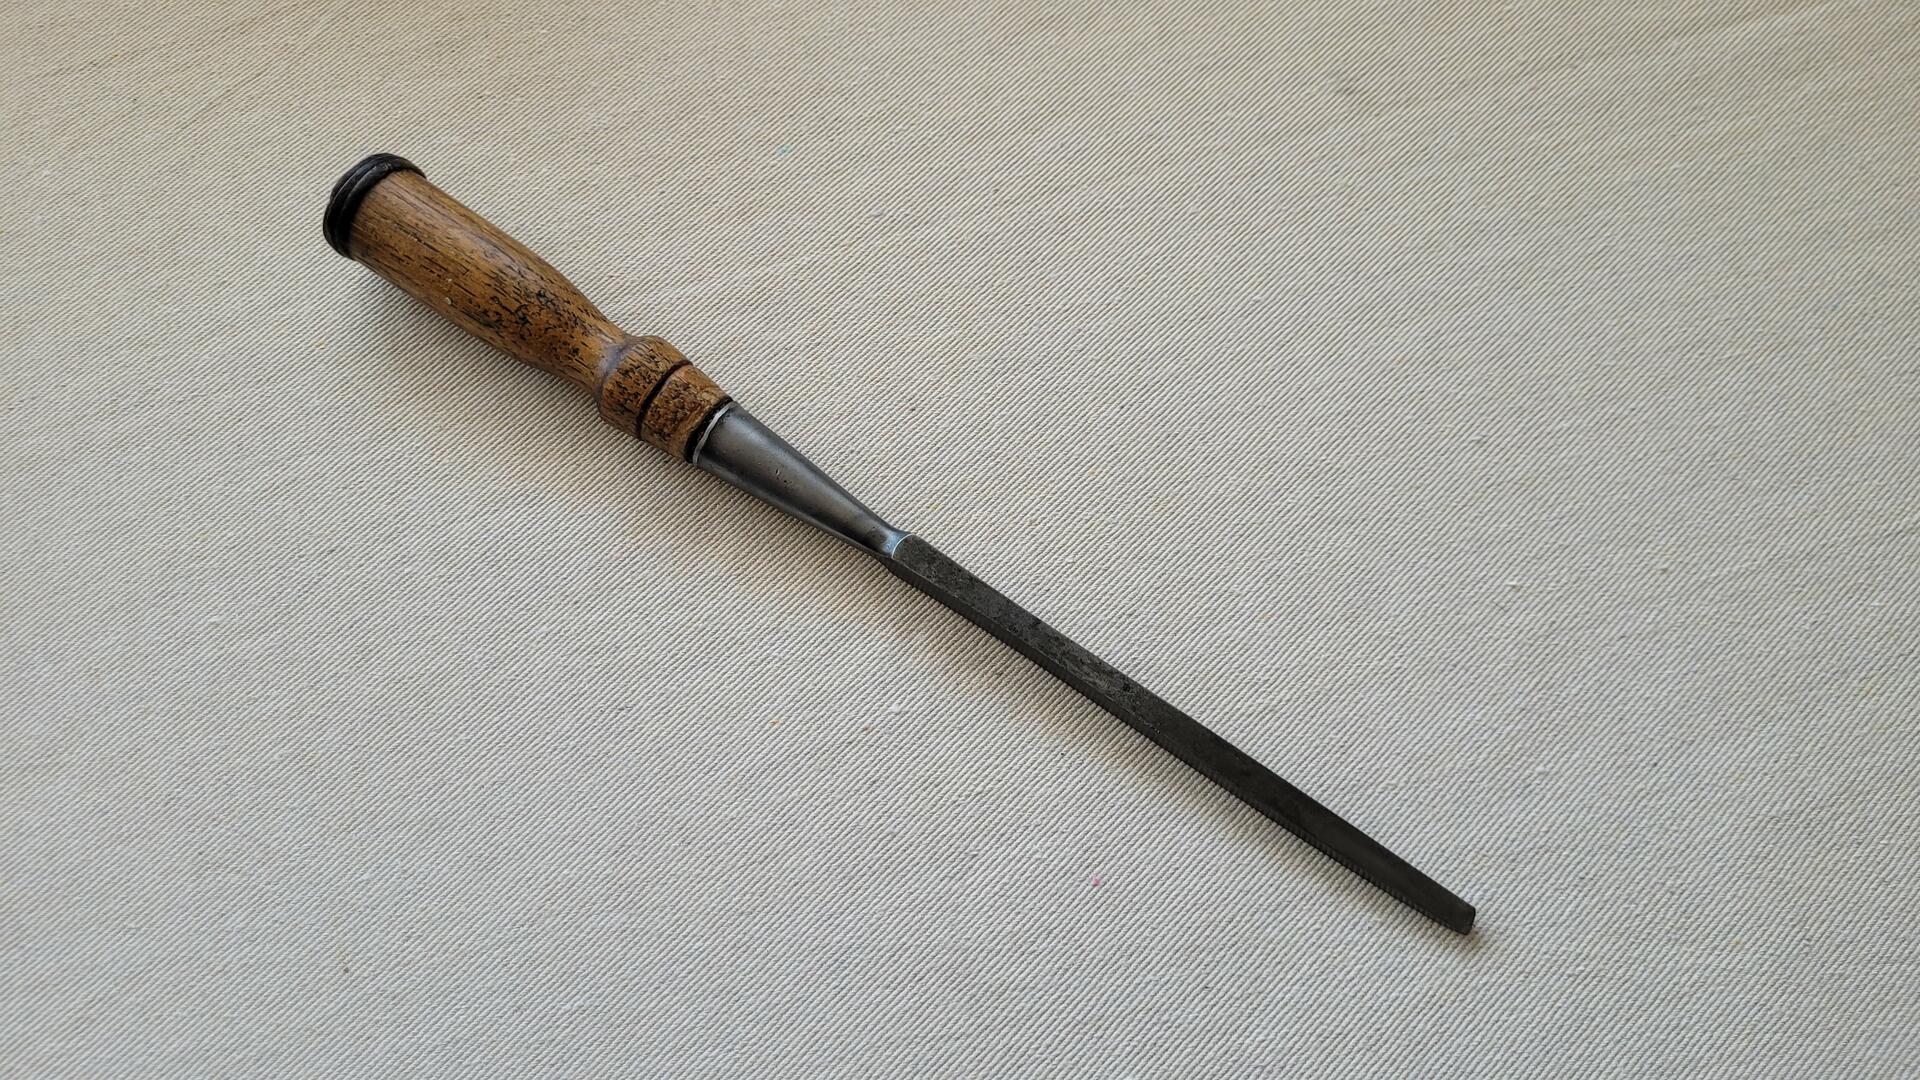 Antique Canadian Champion socket paring chisel by Warnock, J. & Co. Galt, ON Collectible made in Canada woodworking, carpentry and cabinet maker hand tools